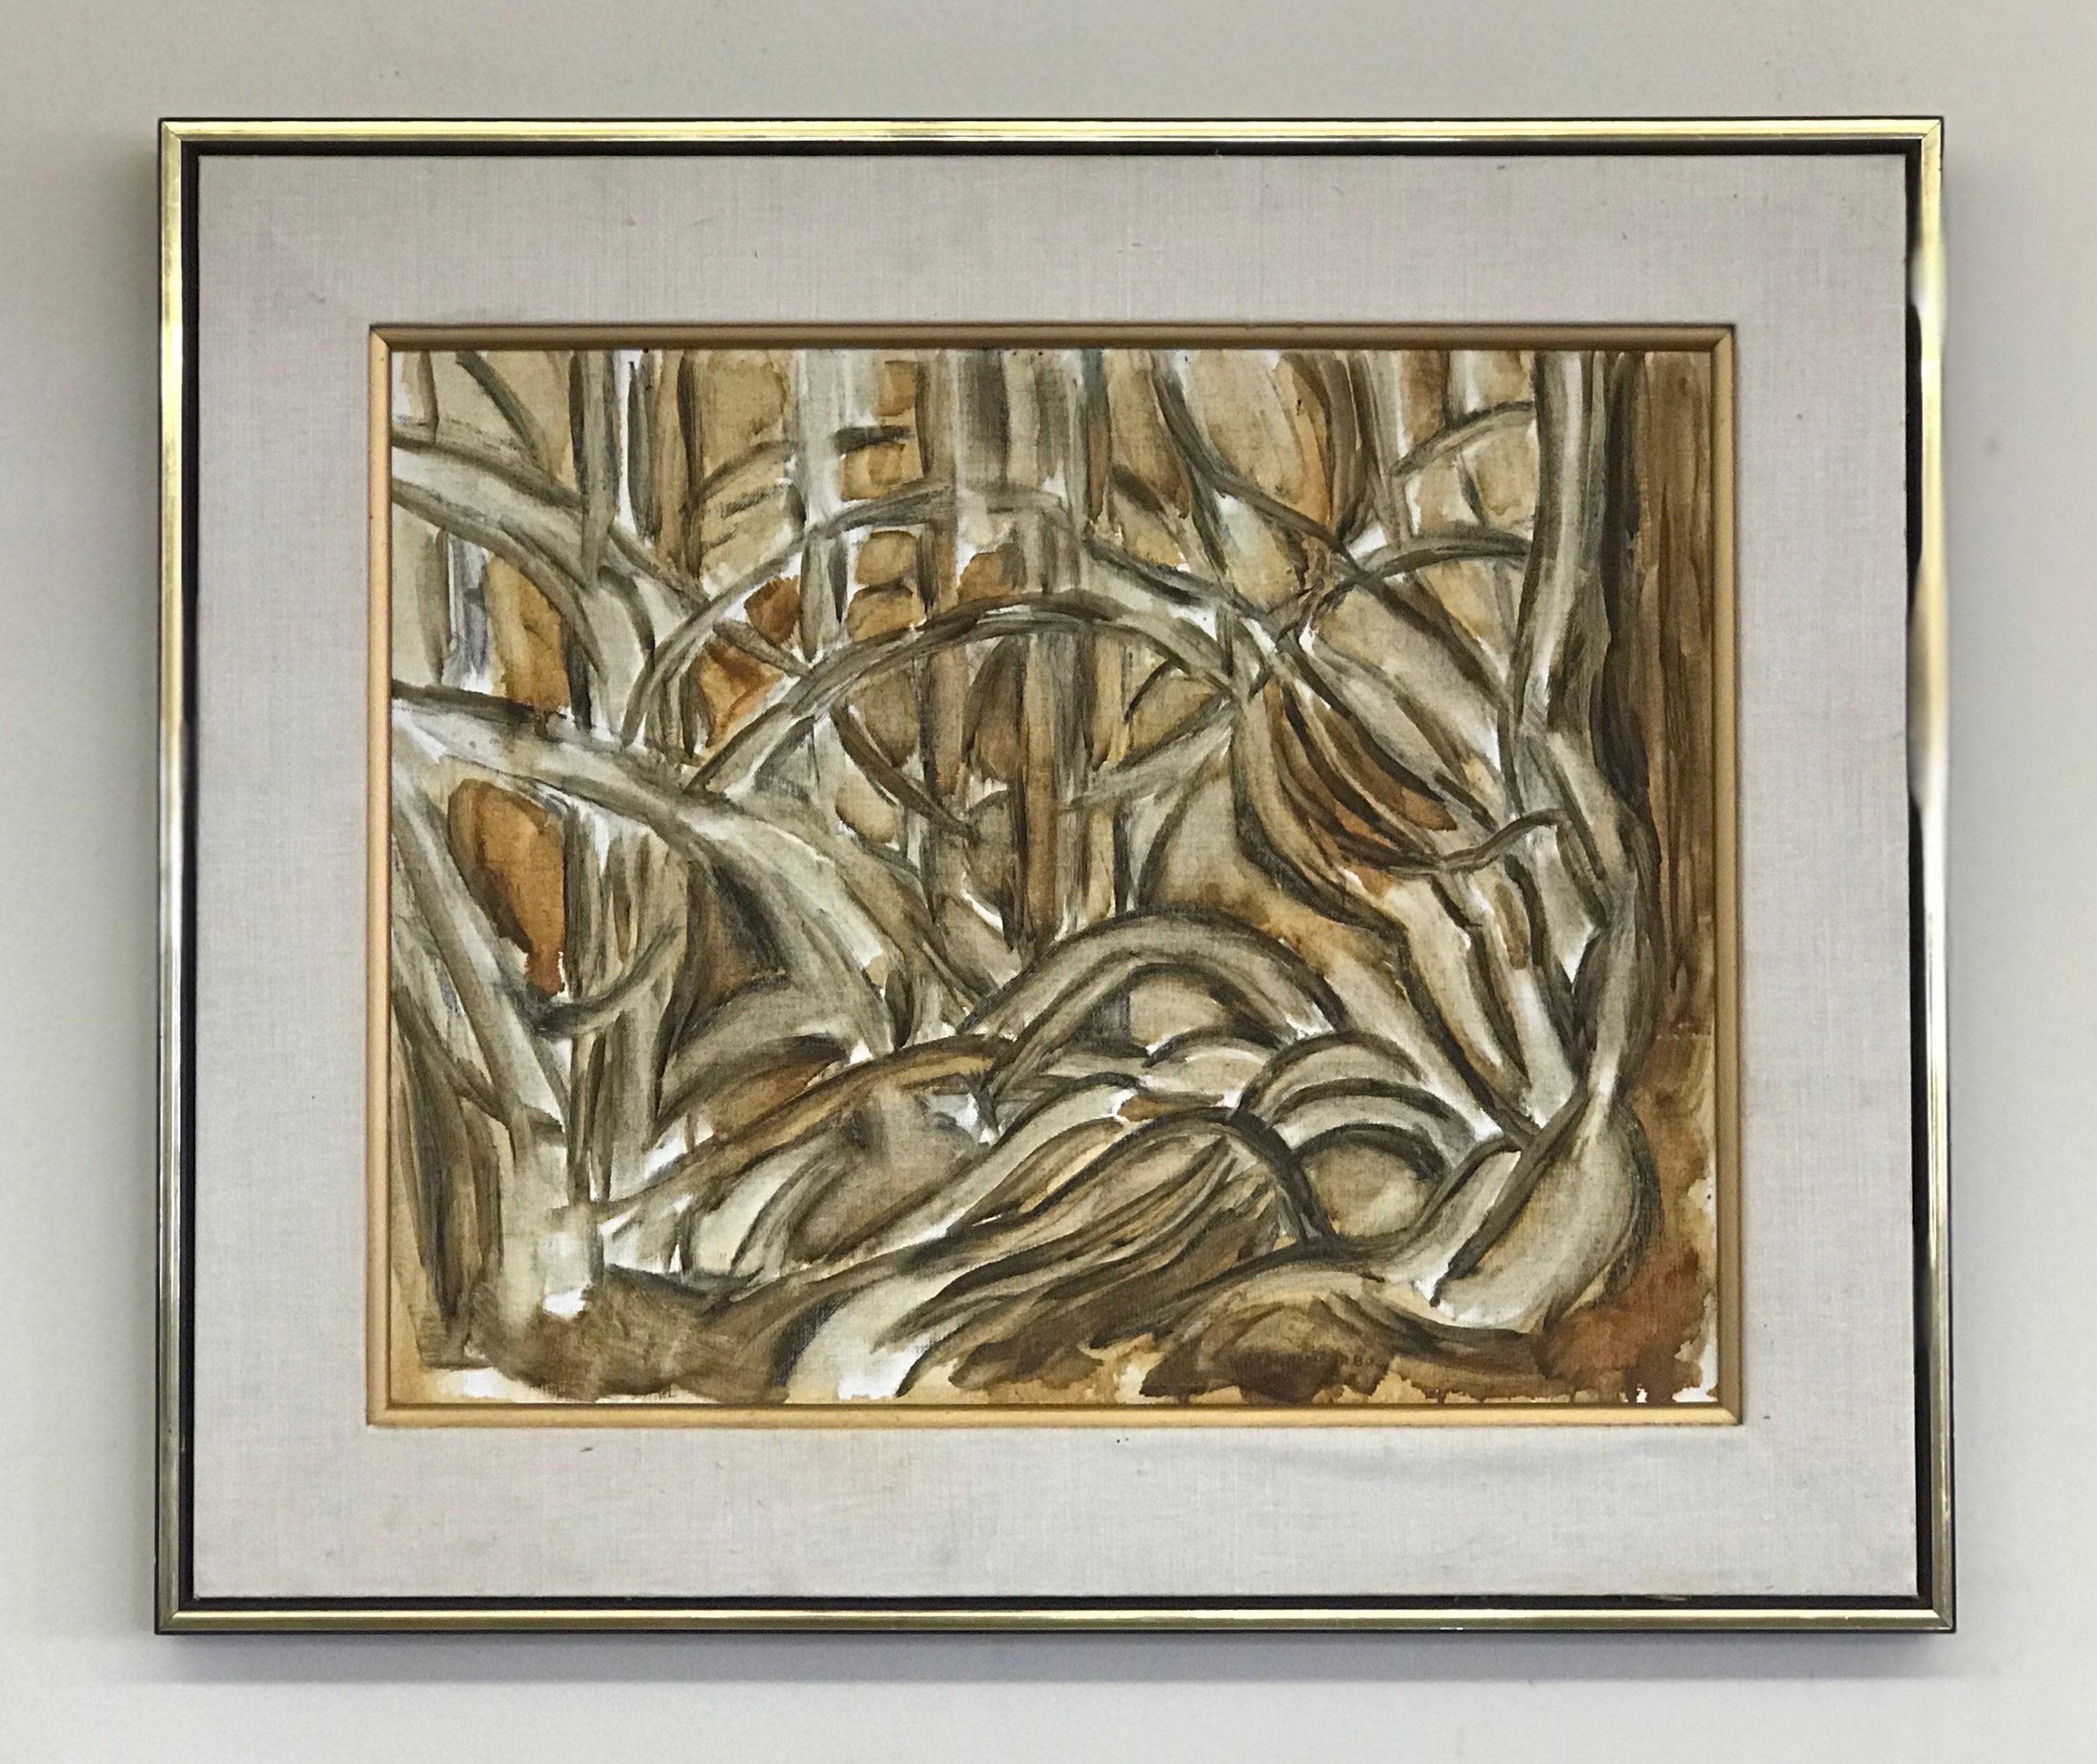 Vintage Mid-Century Modern oil painting golden tones abstract Primitive framed

Dimensions. Overall 26 1/2 W; 22 1/2 H; Actual Art 19 1/2 W; 15 1/2 H.